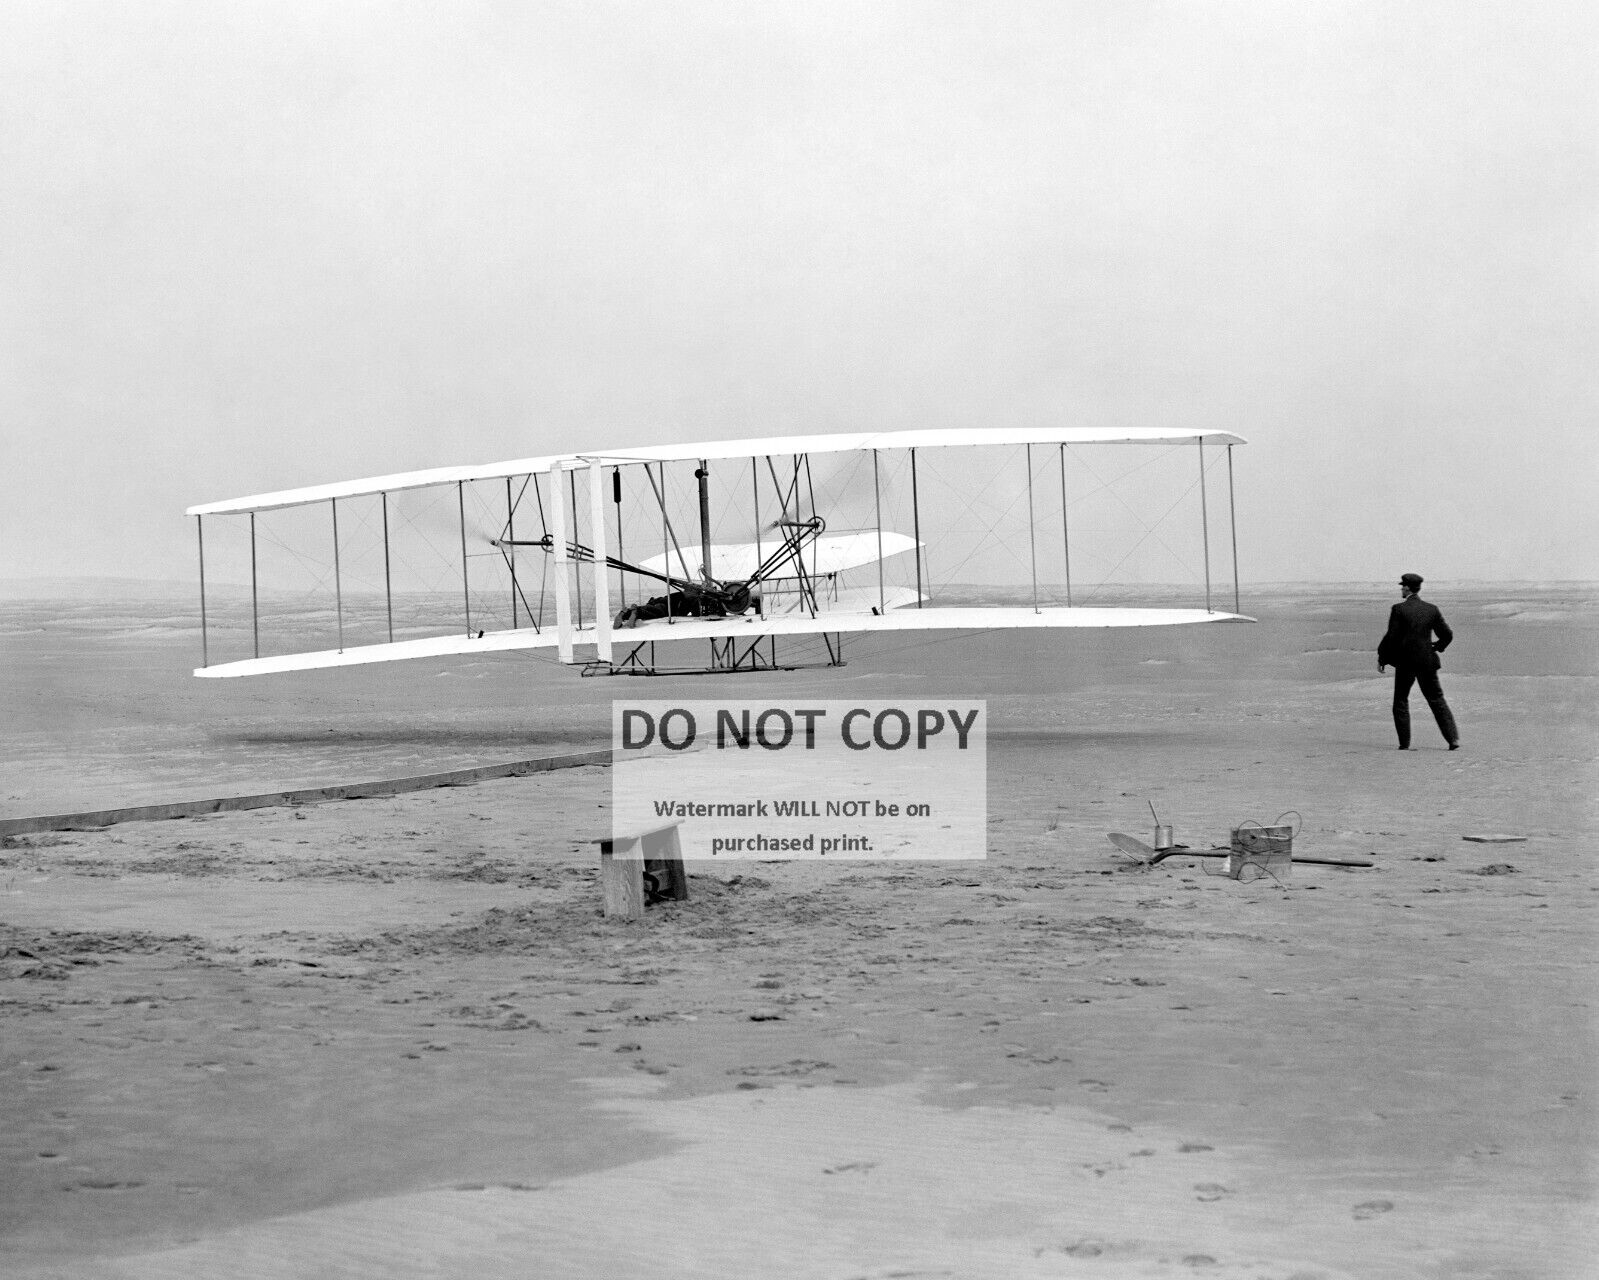 1ST SUCCESSFUL FLIGHT OF THE WRIGHT BROTHERS FLYER IN 1903 - 8X10 PHOTO (OP-788)